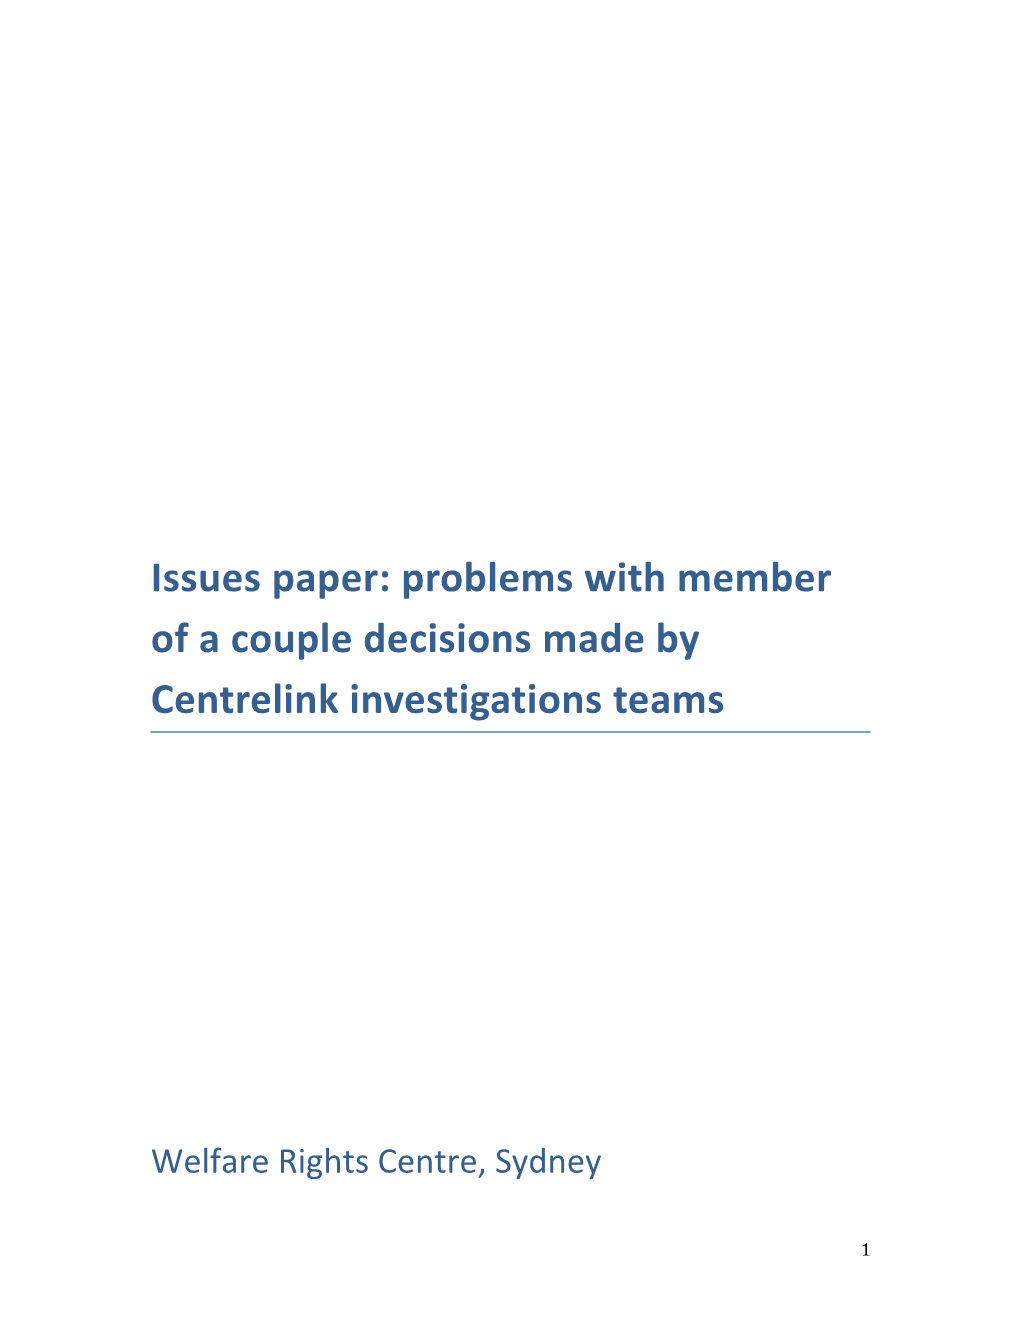 Issues Paper: Problems with Member of a Couple Decisions Made by Centrelink Investigations